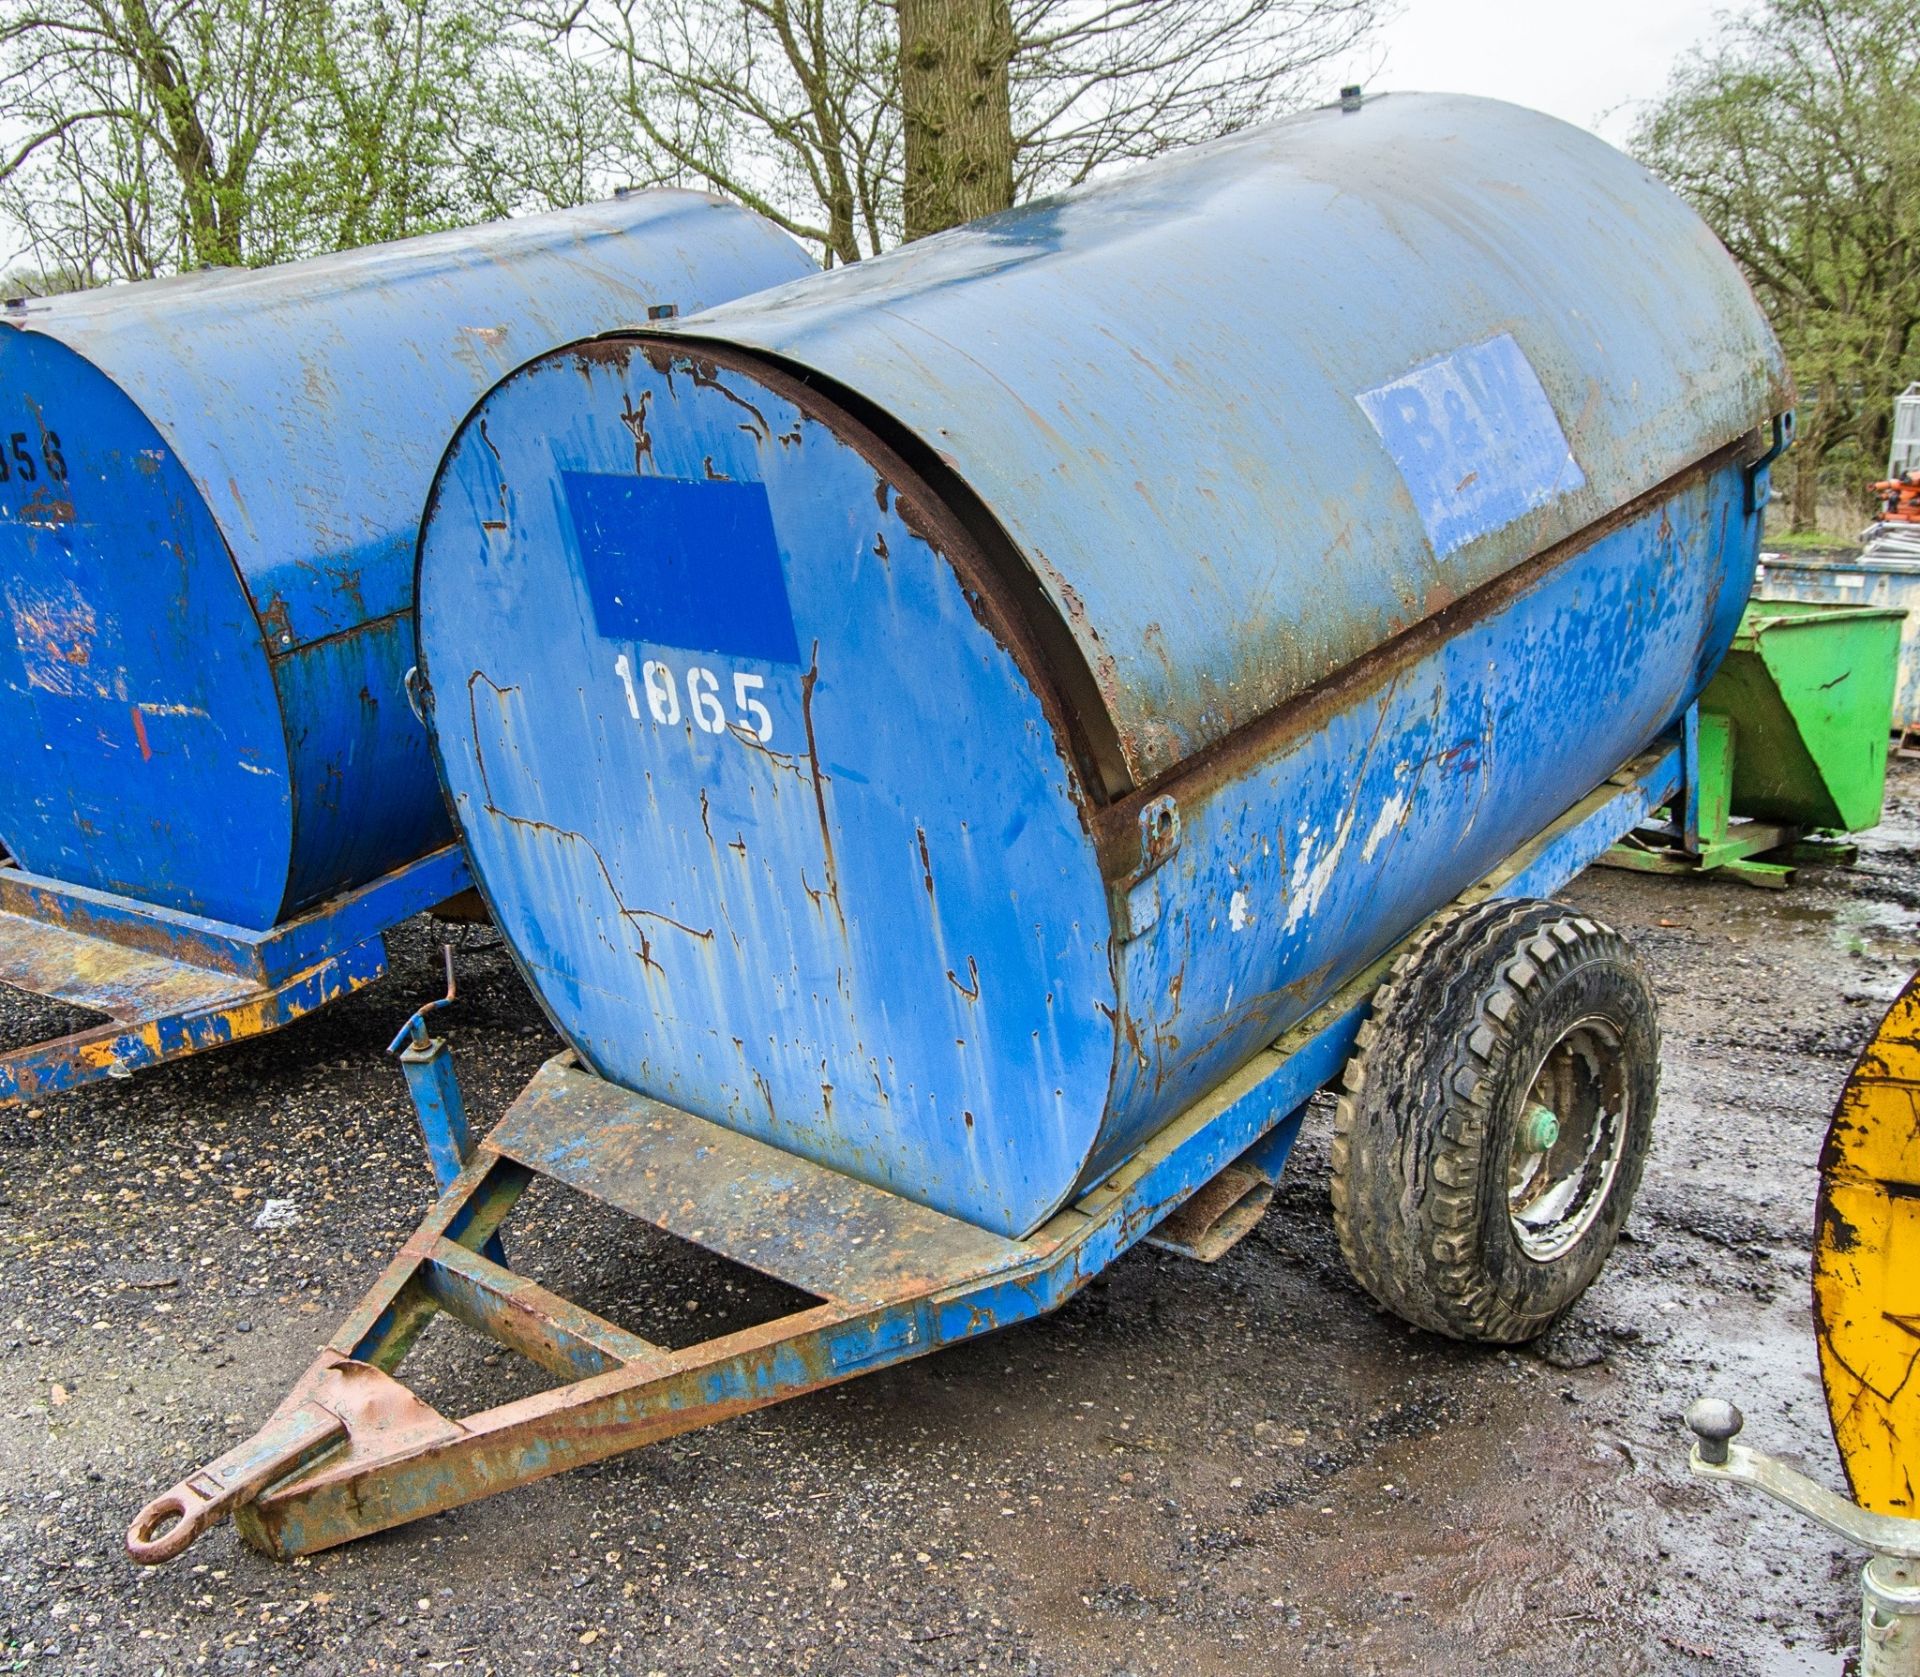 Trailer Engineering 2140 litre site tow bunded fuel bowser c/w manual pump, delivery hose &